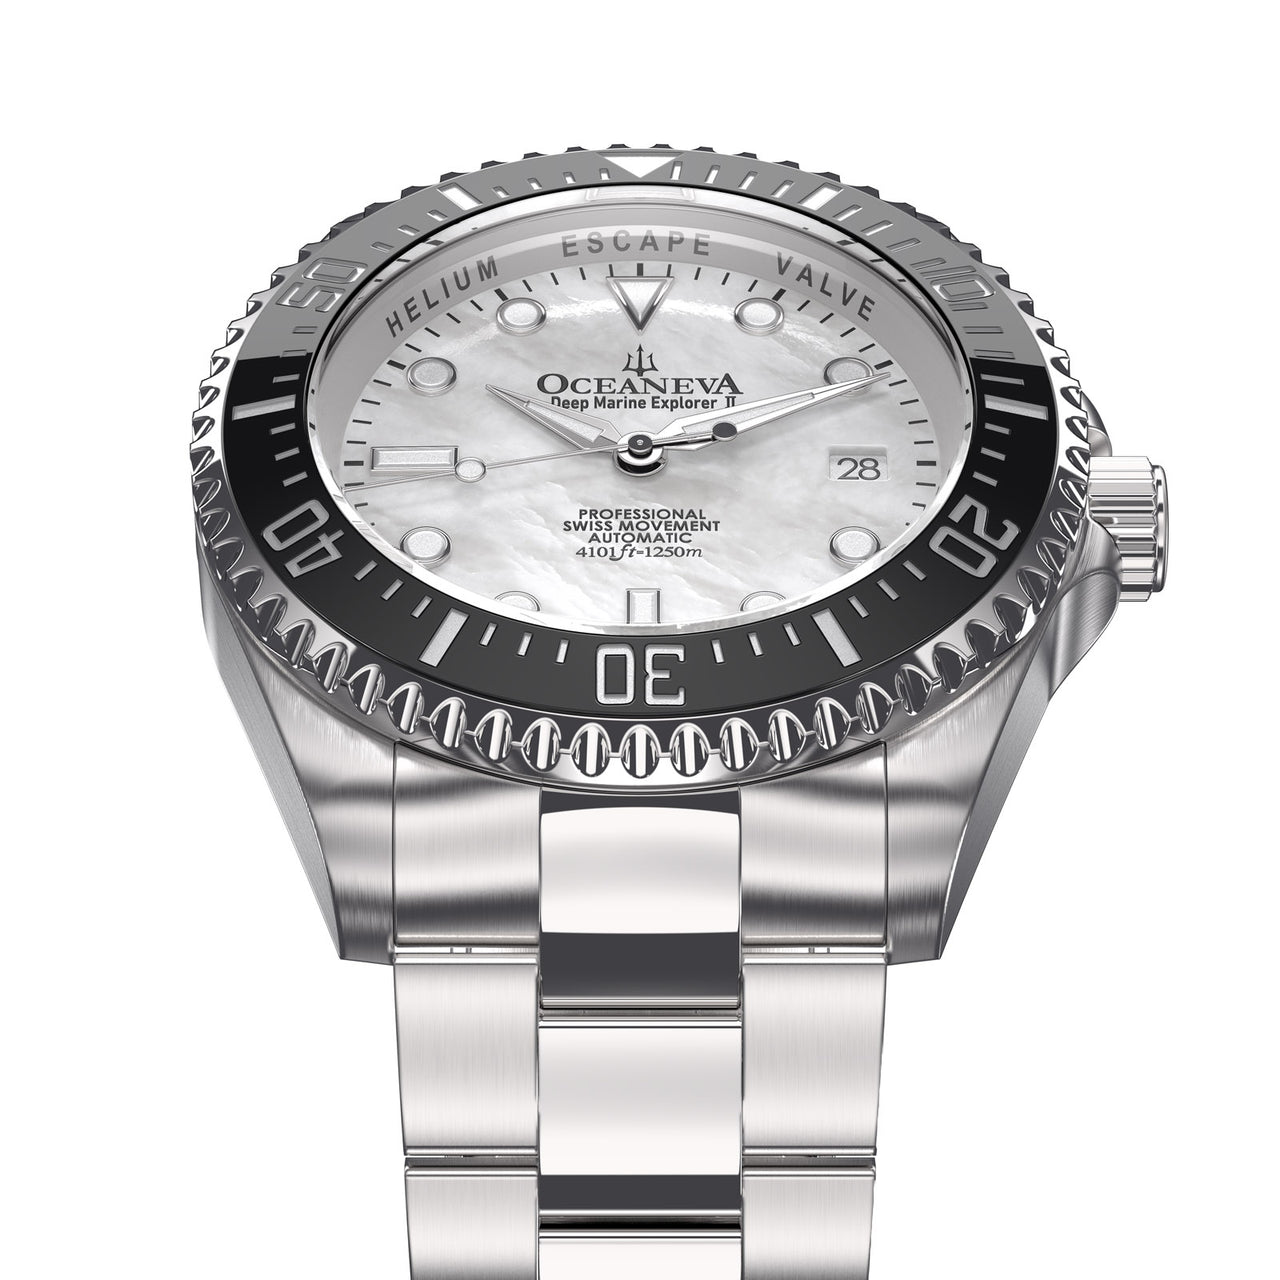 Oceaneva 1250M Dive Watch White Mother Of Pearl Frontal View Picture